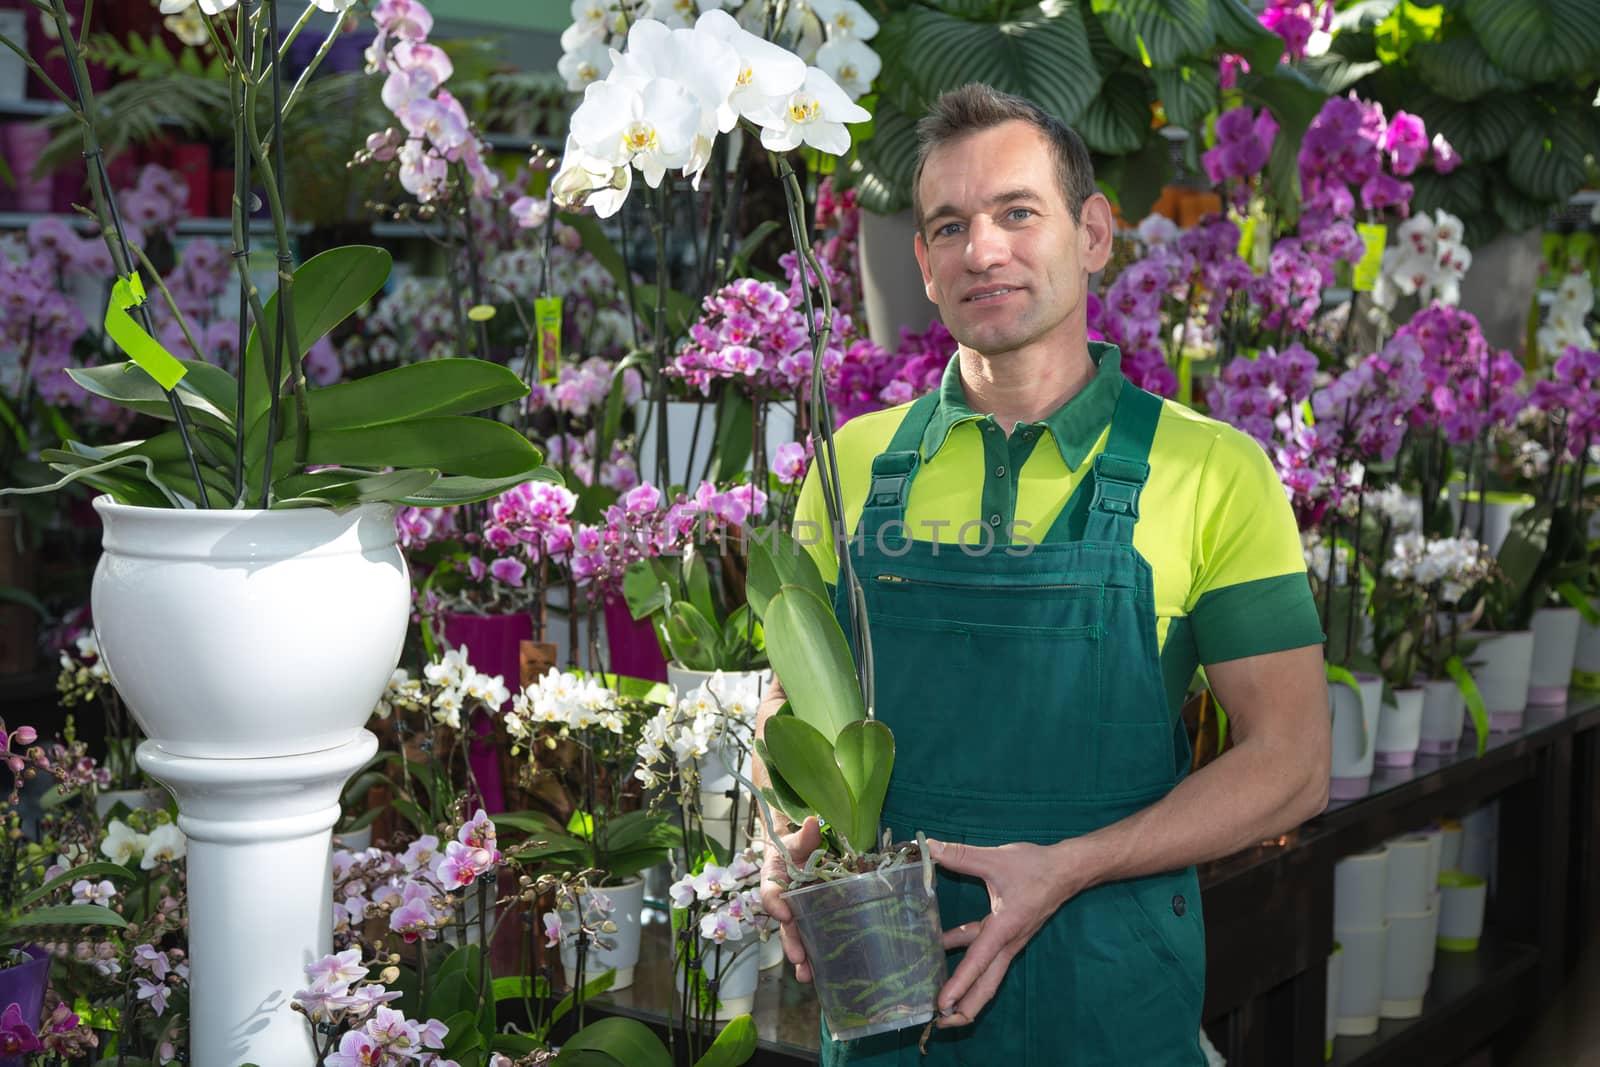 Florist in flower shop posing with an orchid